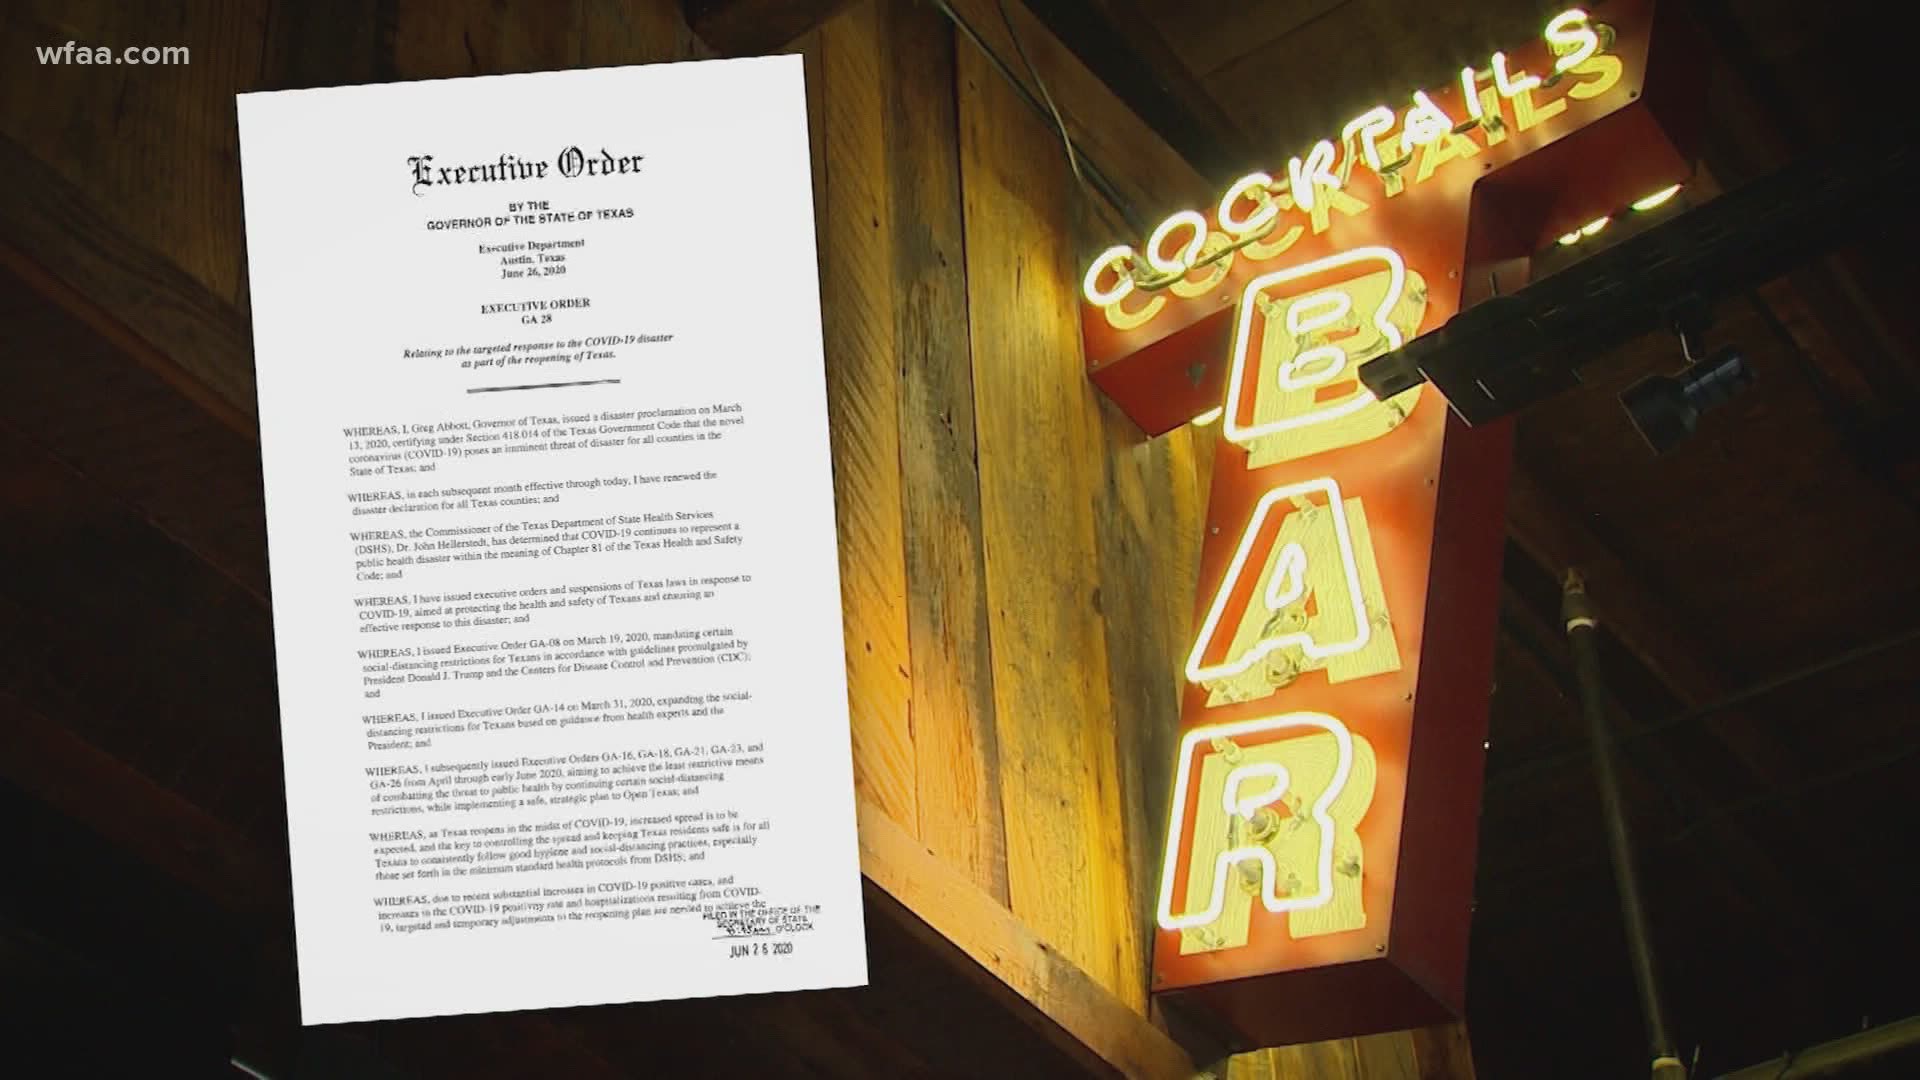 New COVID-19 requirements aren't slowing down business at some North Texas restaurants